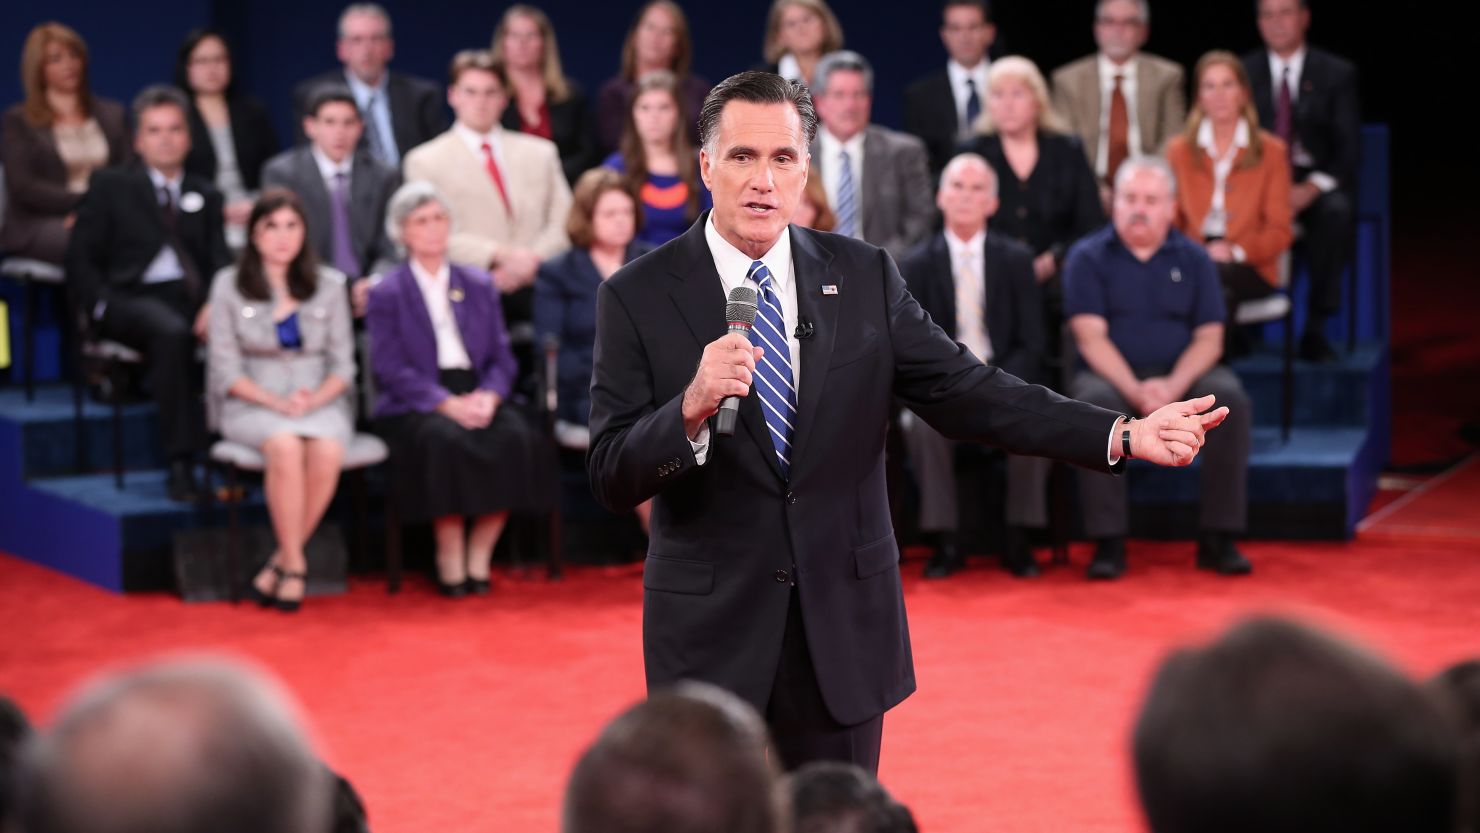 Mitt Romney speaks to the audience during Tuesday night's town hall presidential debate.